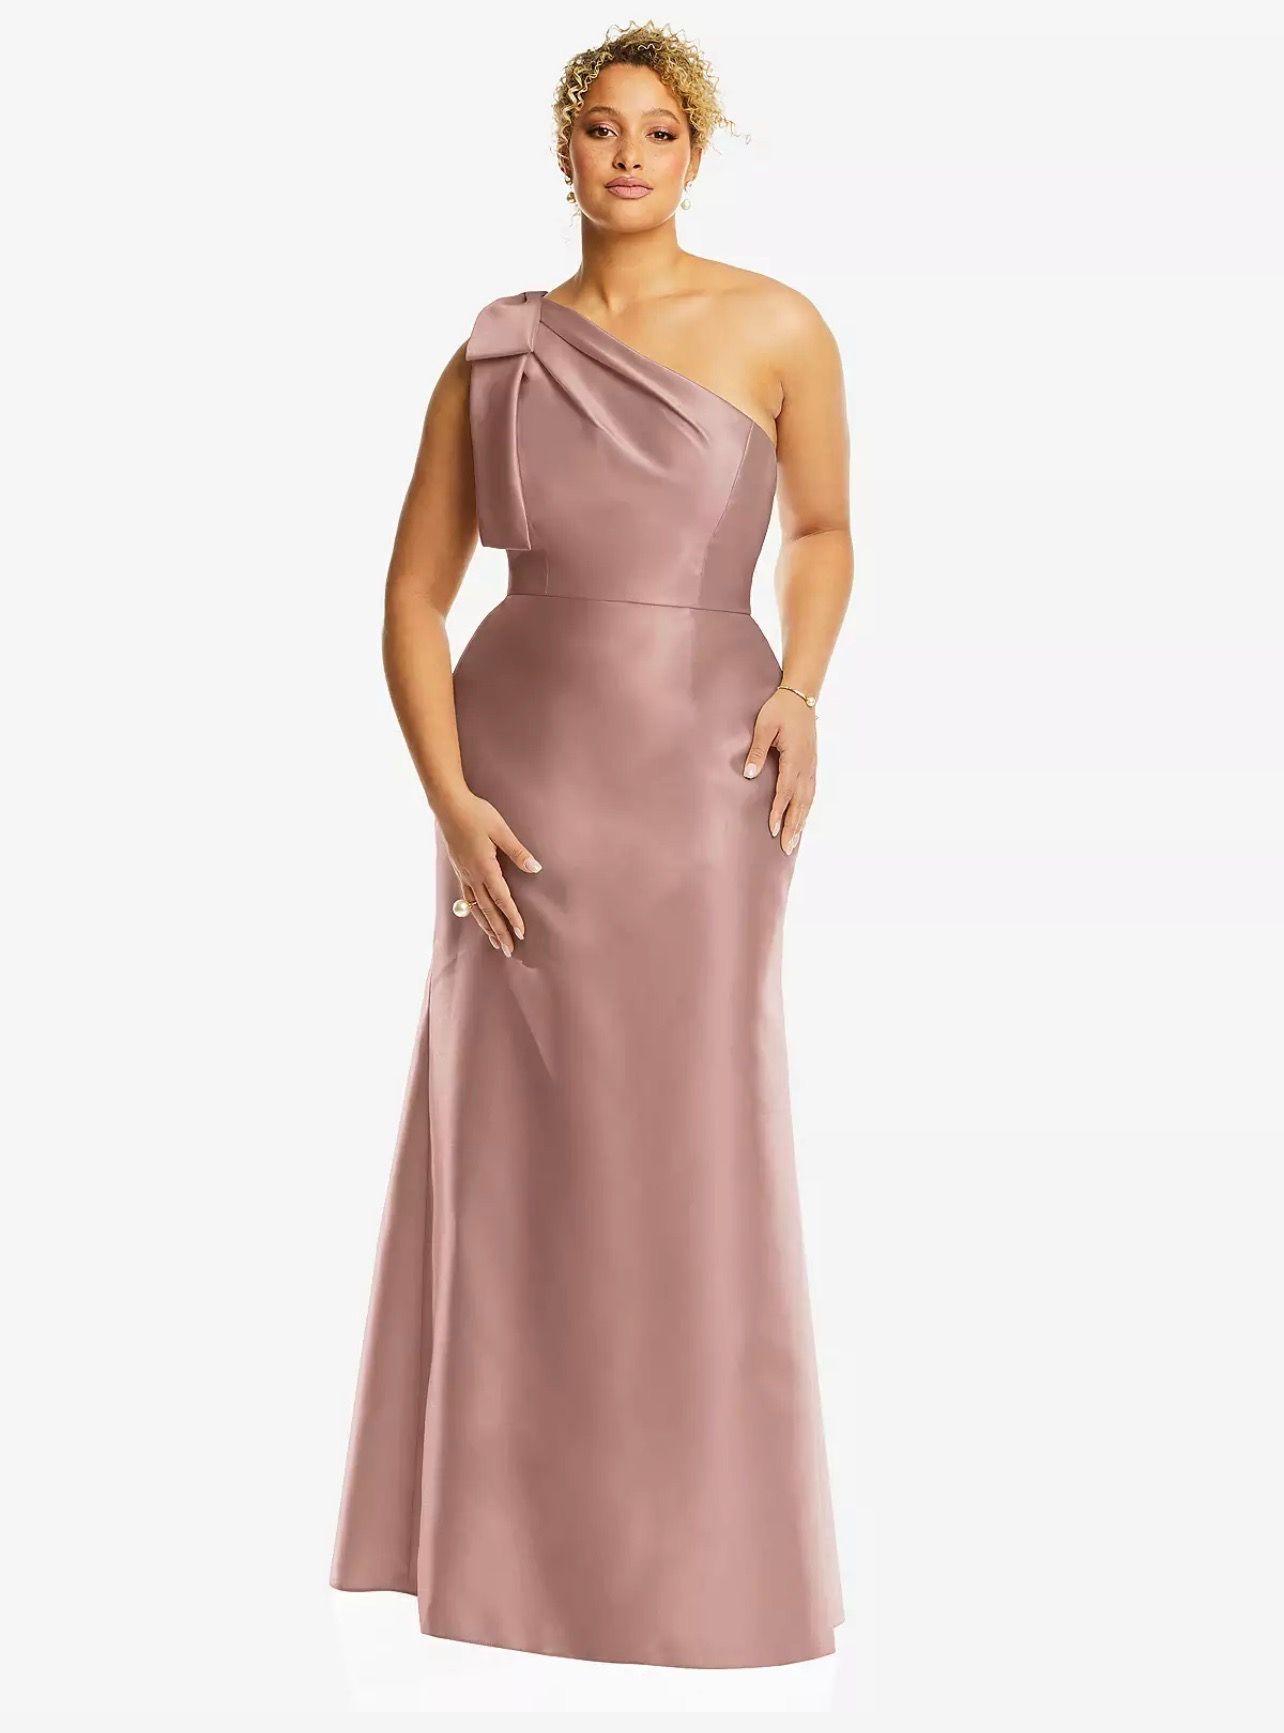 The Dessy Group, high end bridesmaids dresses, different styles, modern styles, off the shoulder